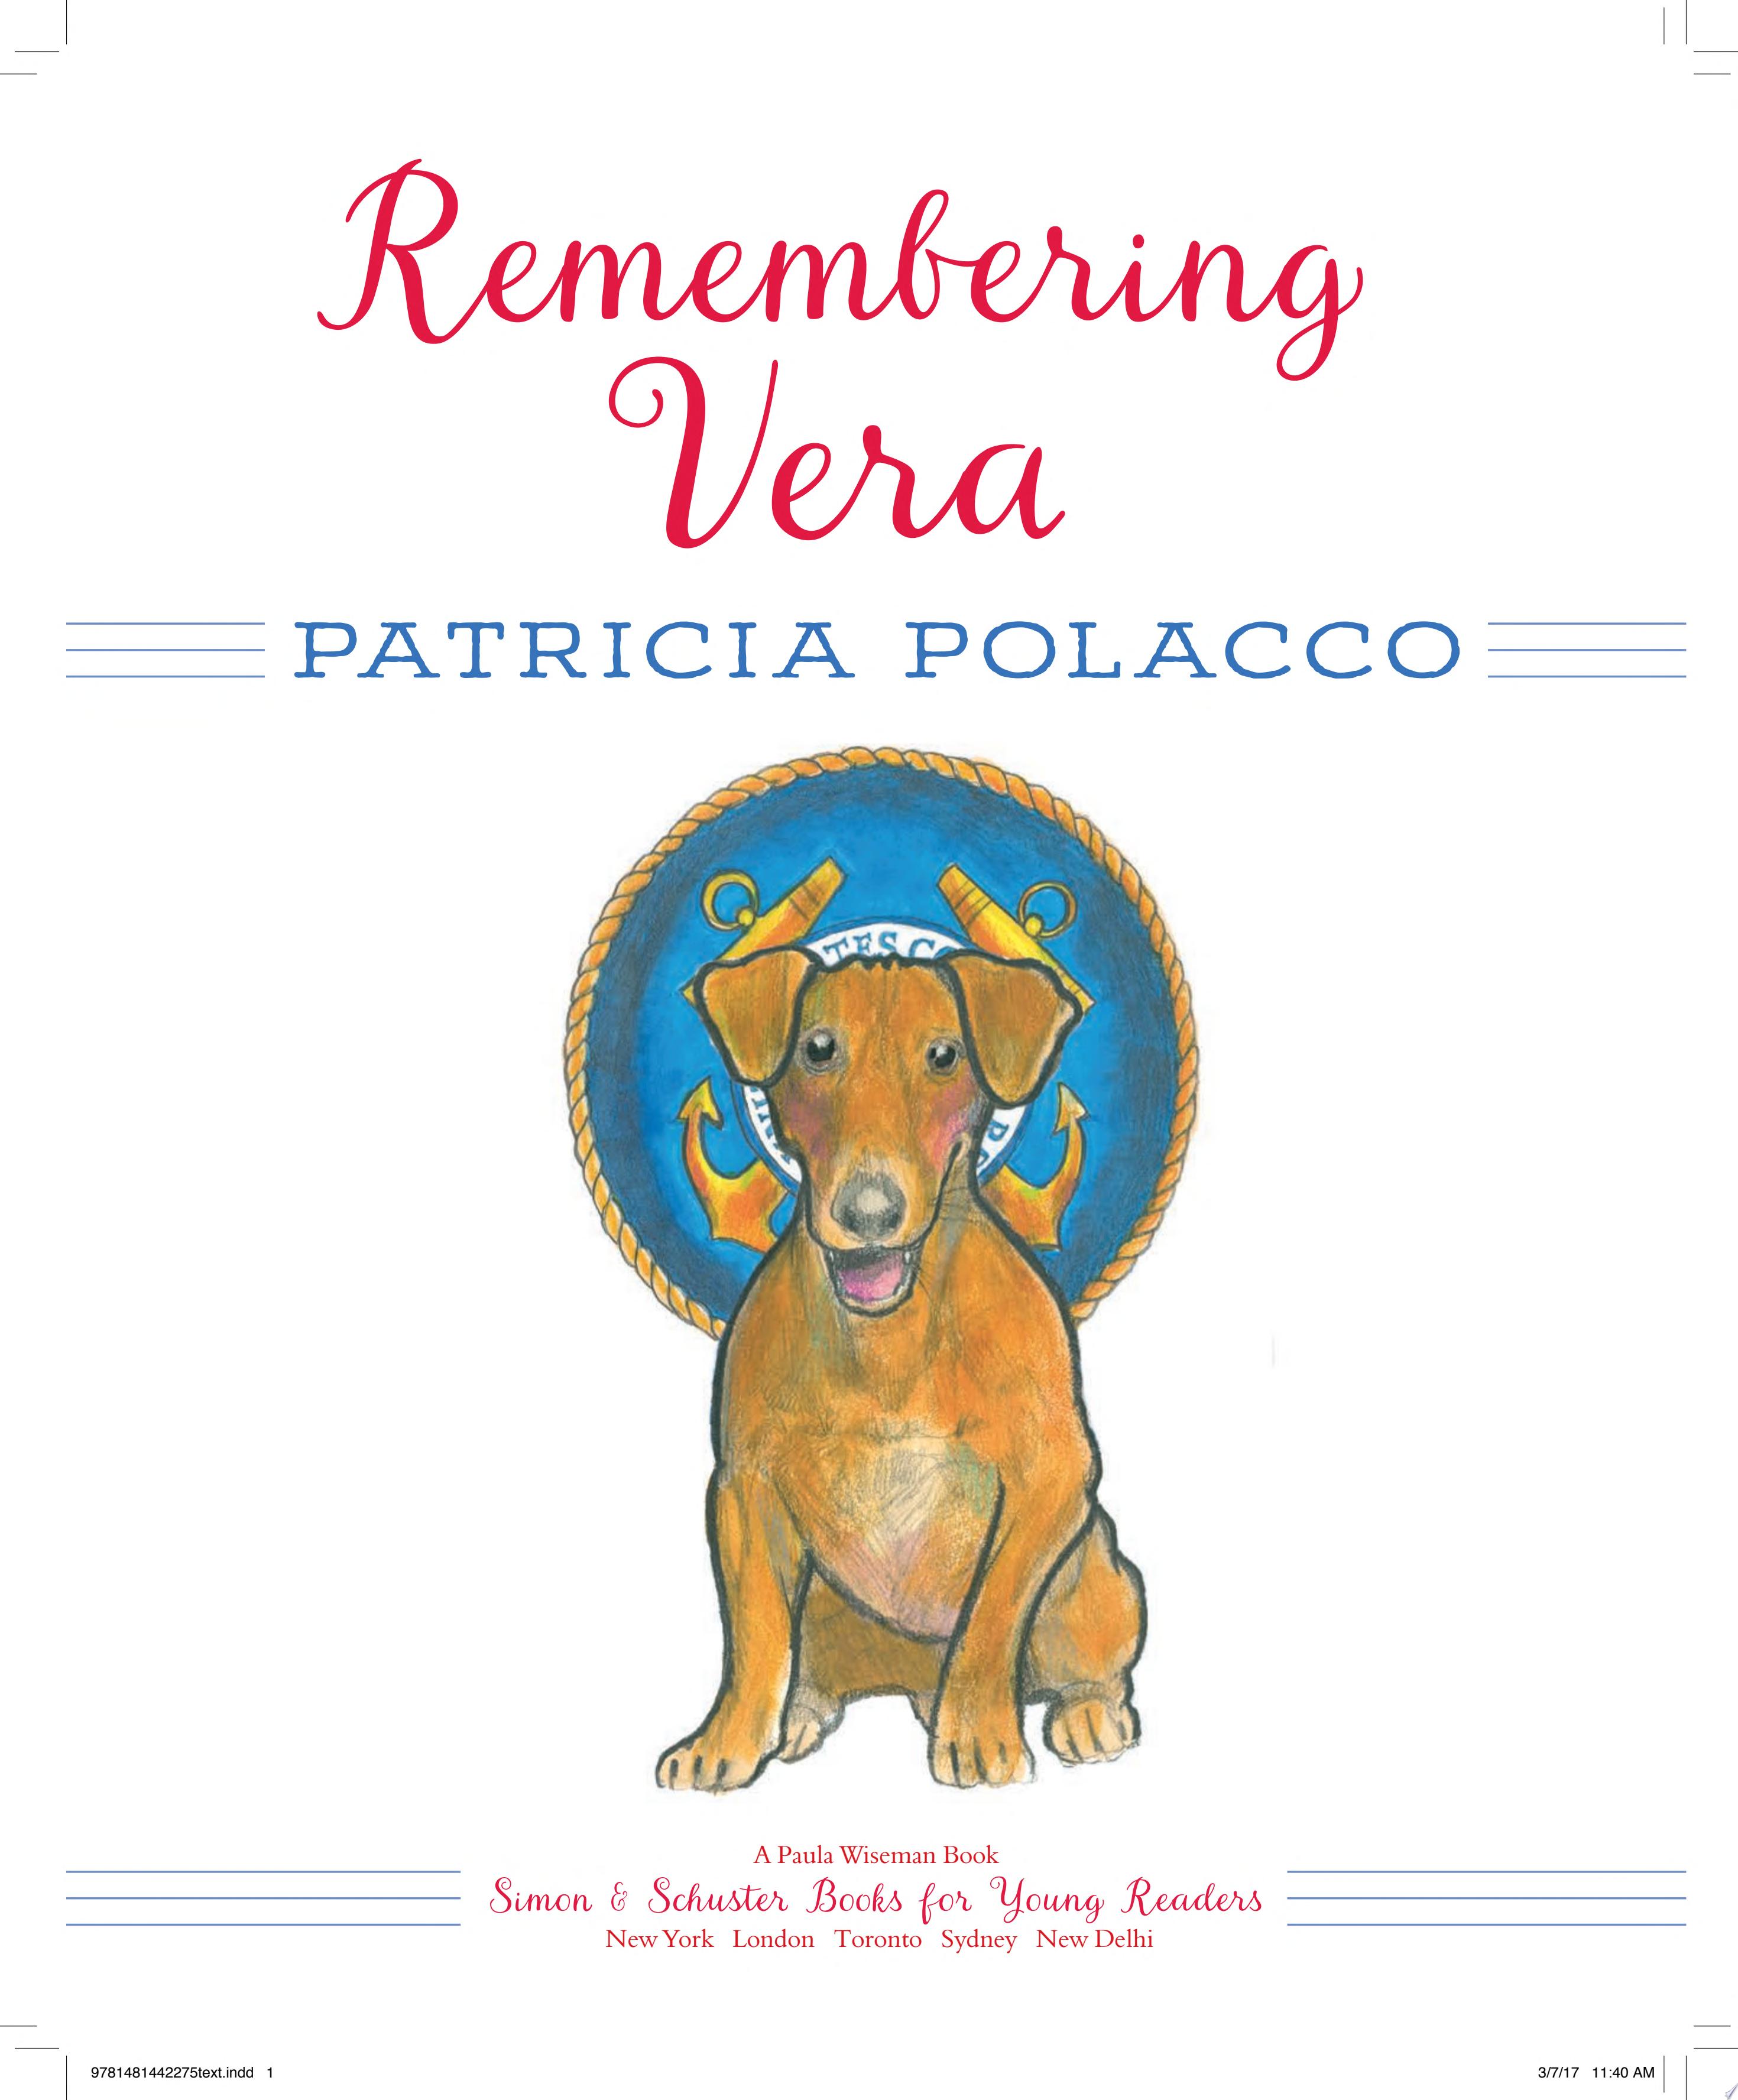 Image for "Remembering Vera"